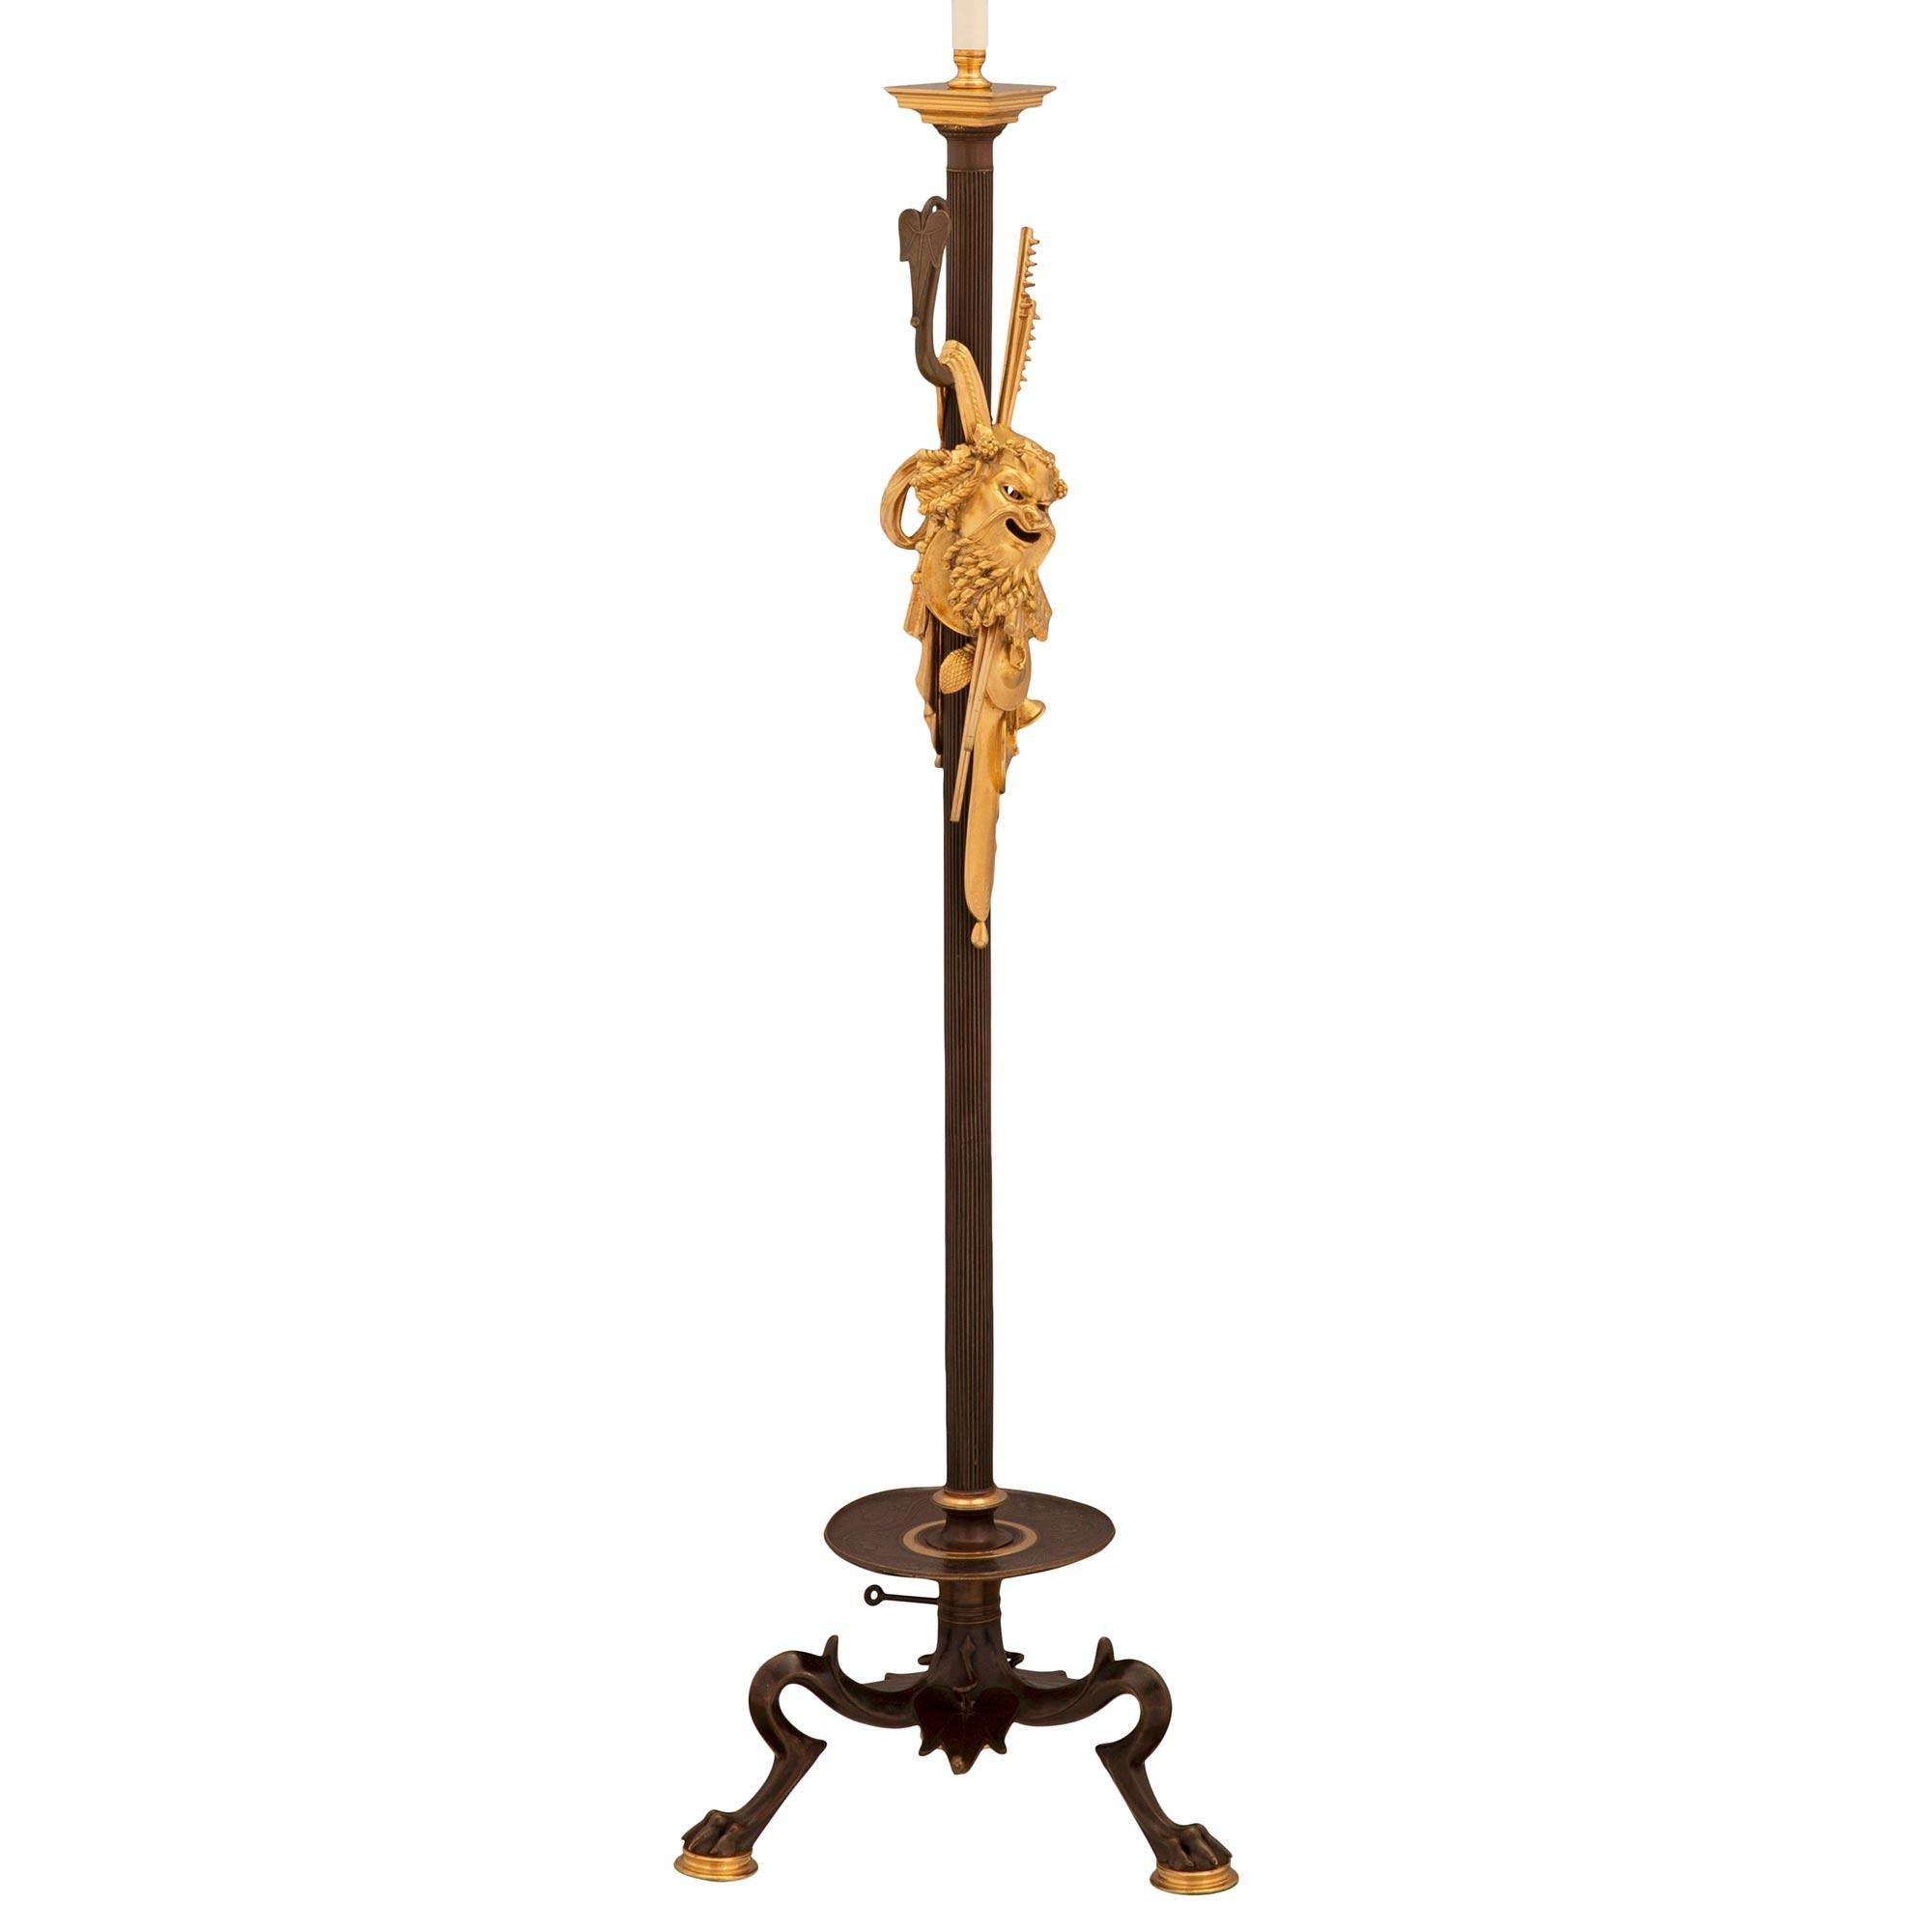 Neoclassical French 19th Century Neo-Classical St. Patinated Bronze and Ormolu Floor Lamp For Sale